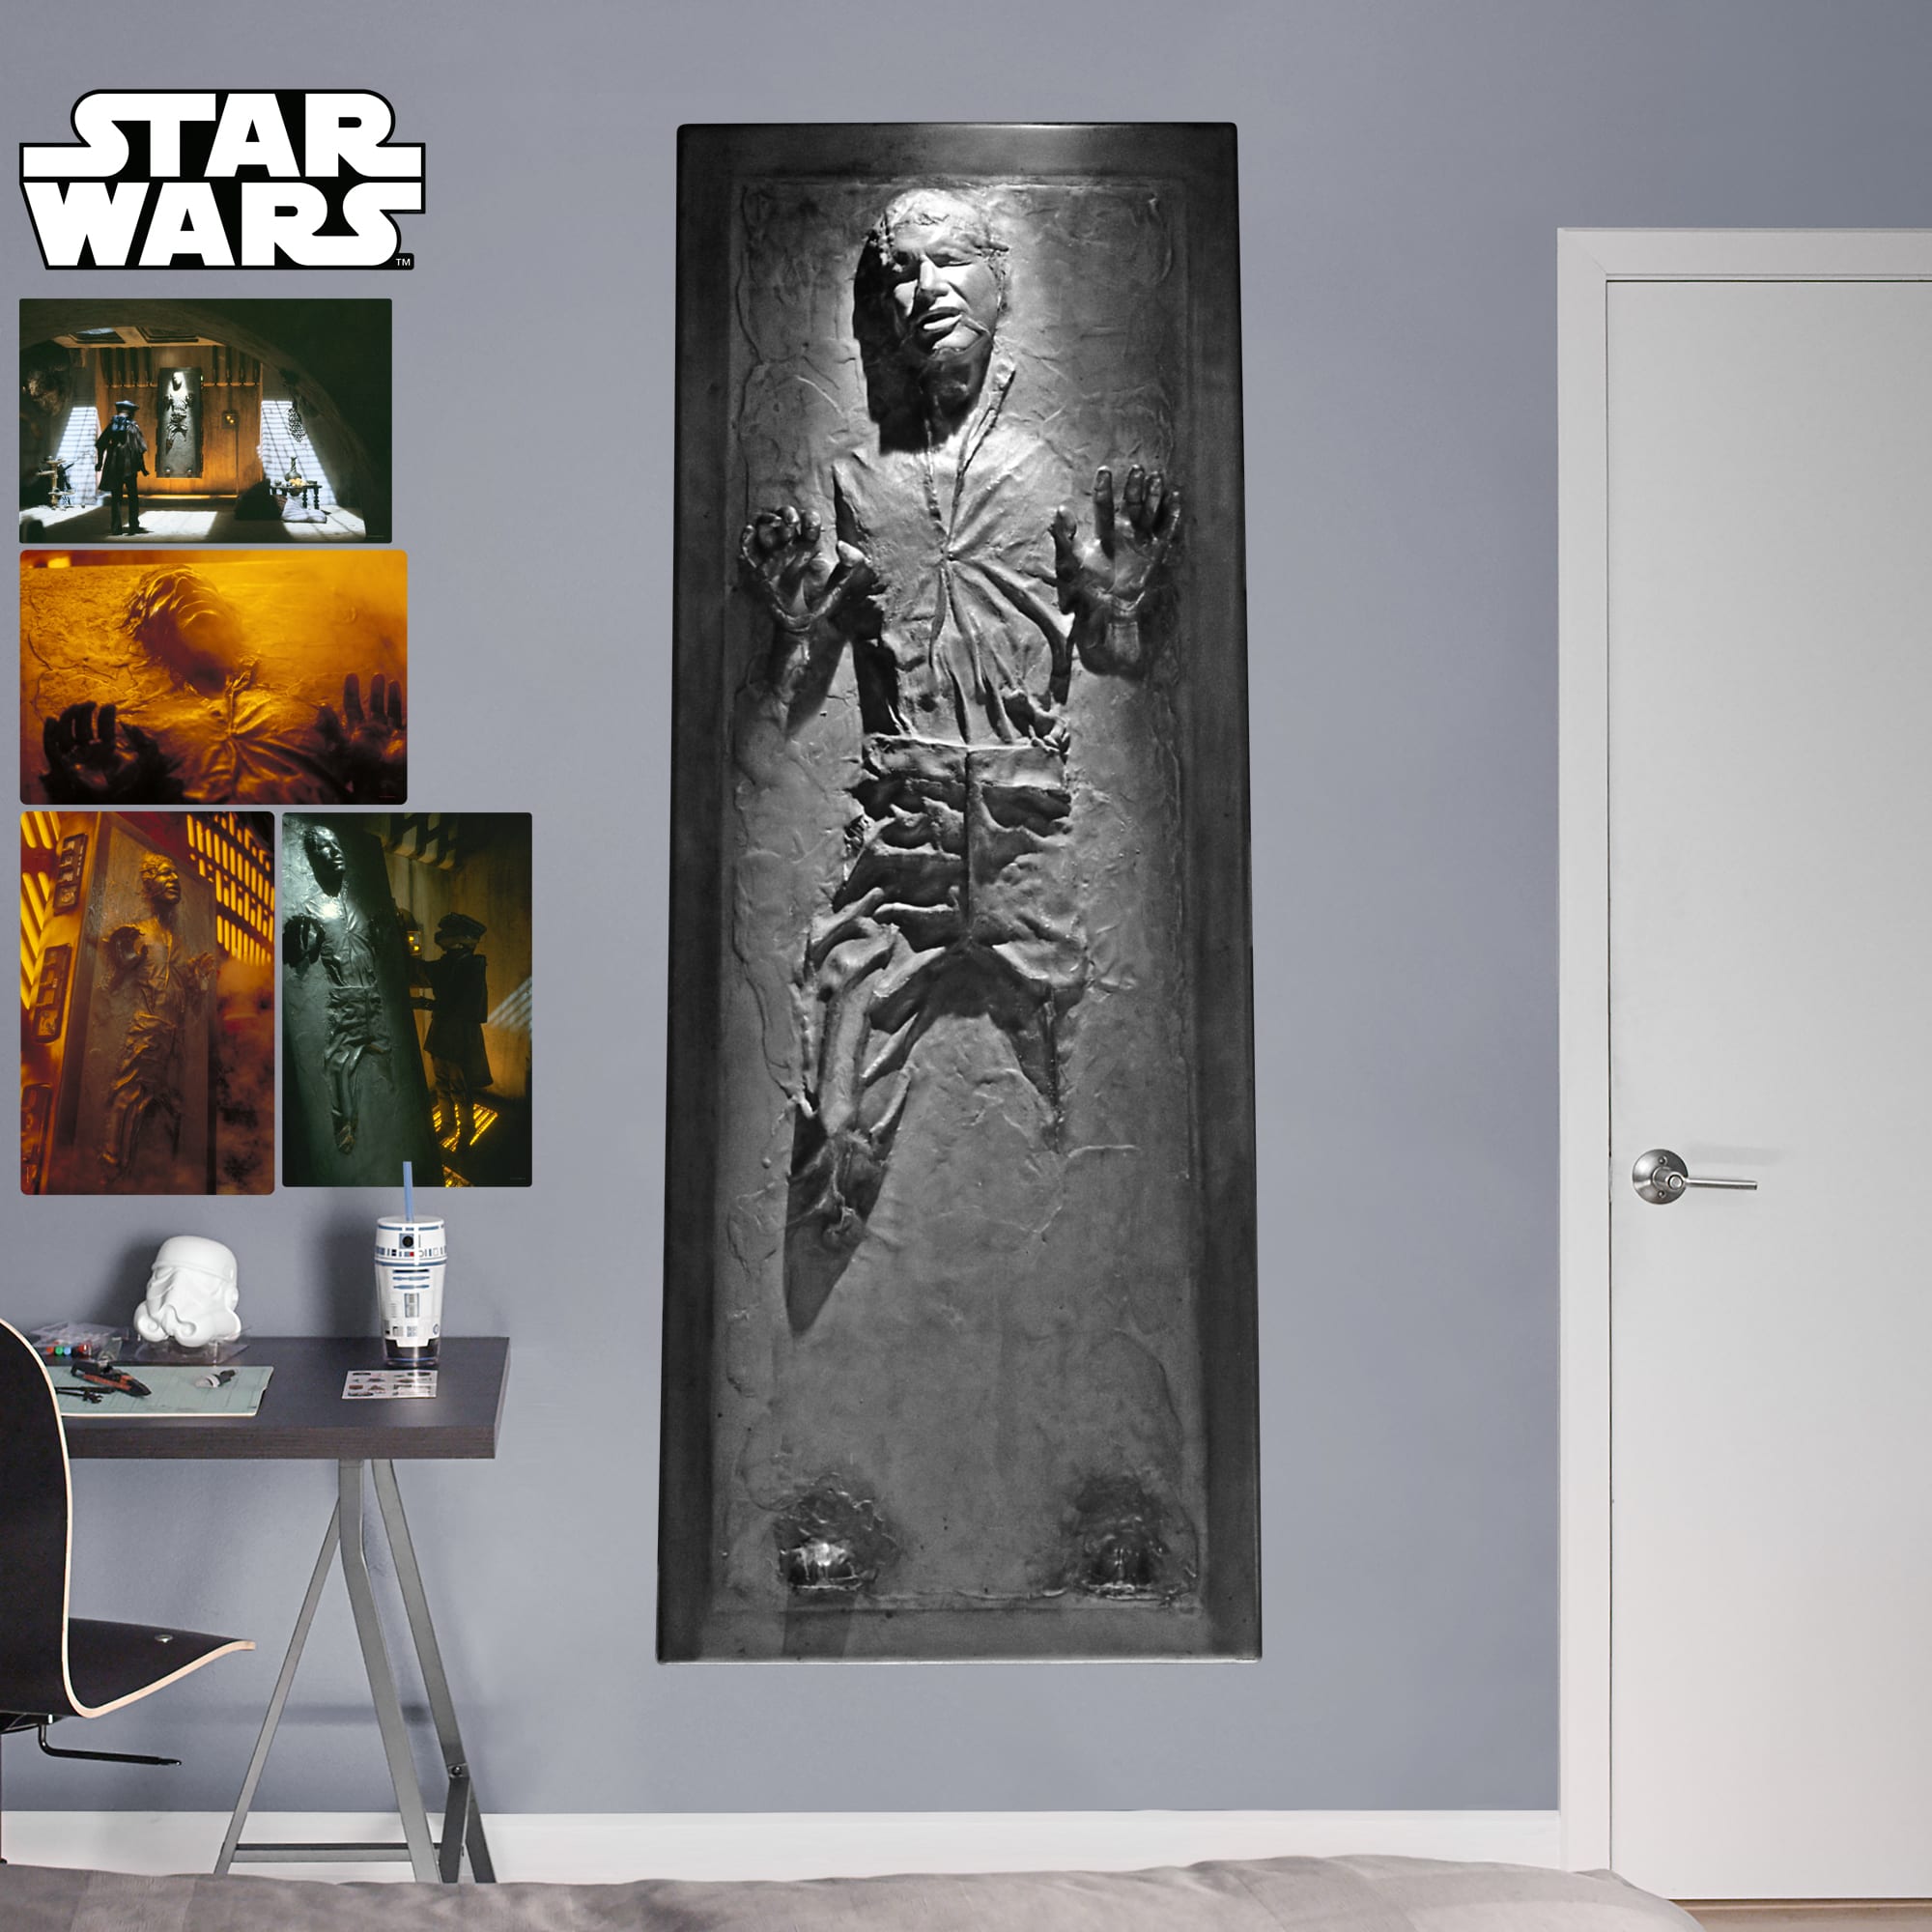 Han Solo: In Carbonite - Officially Licensed Removable Wall Decal Life-Size Character + 3 Decals (31"W x 78"H) by Fathead | Viny